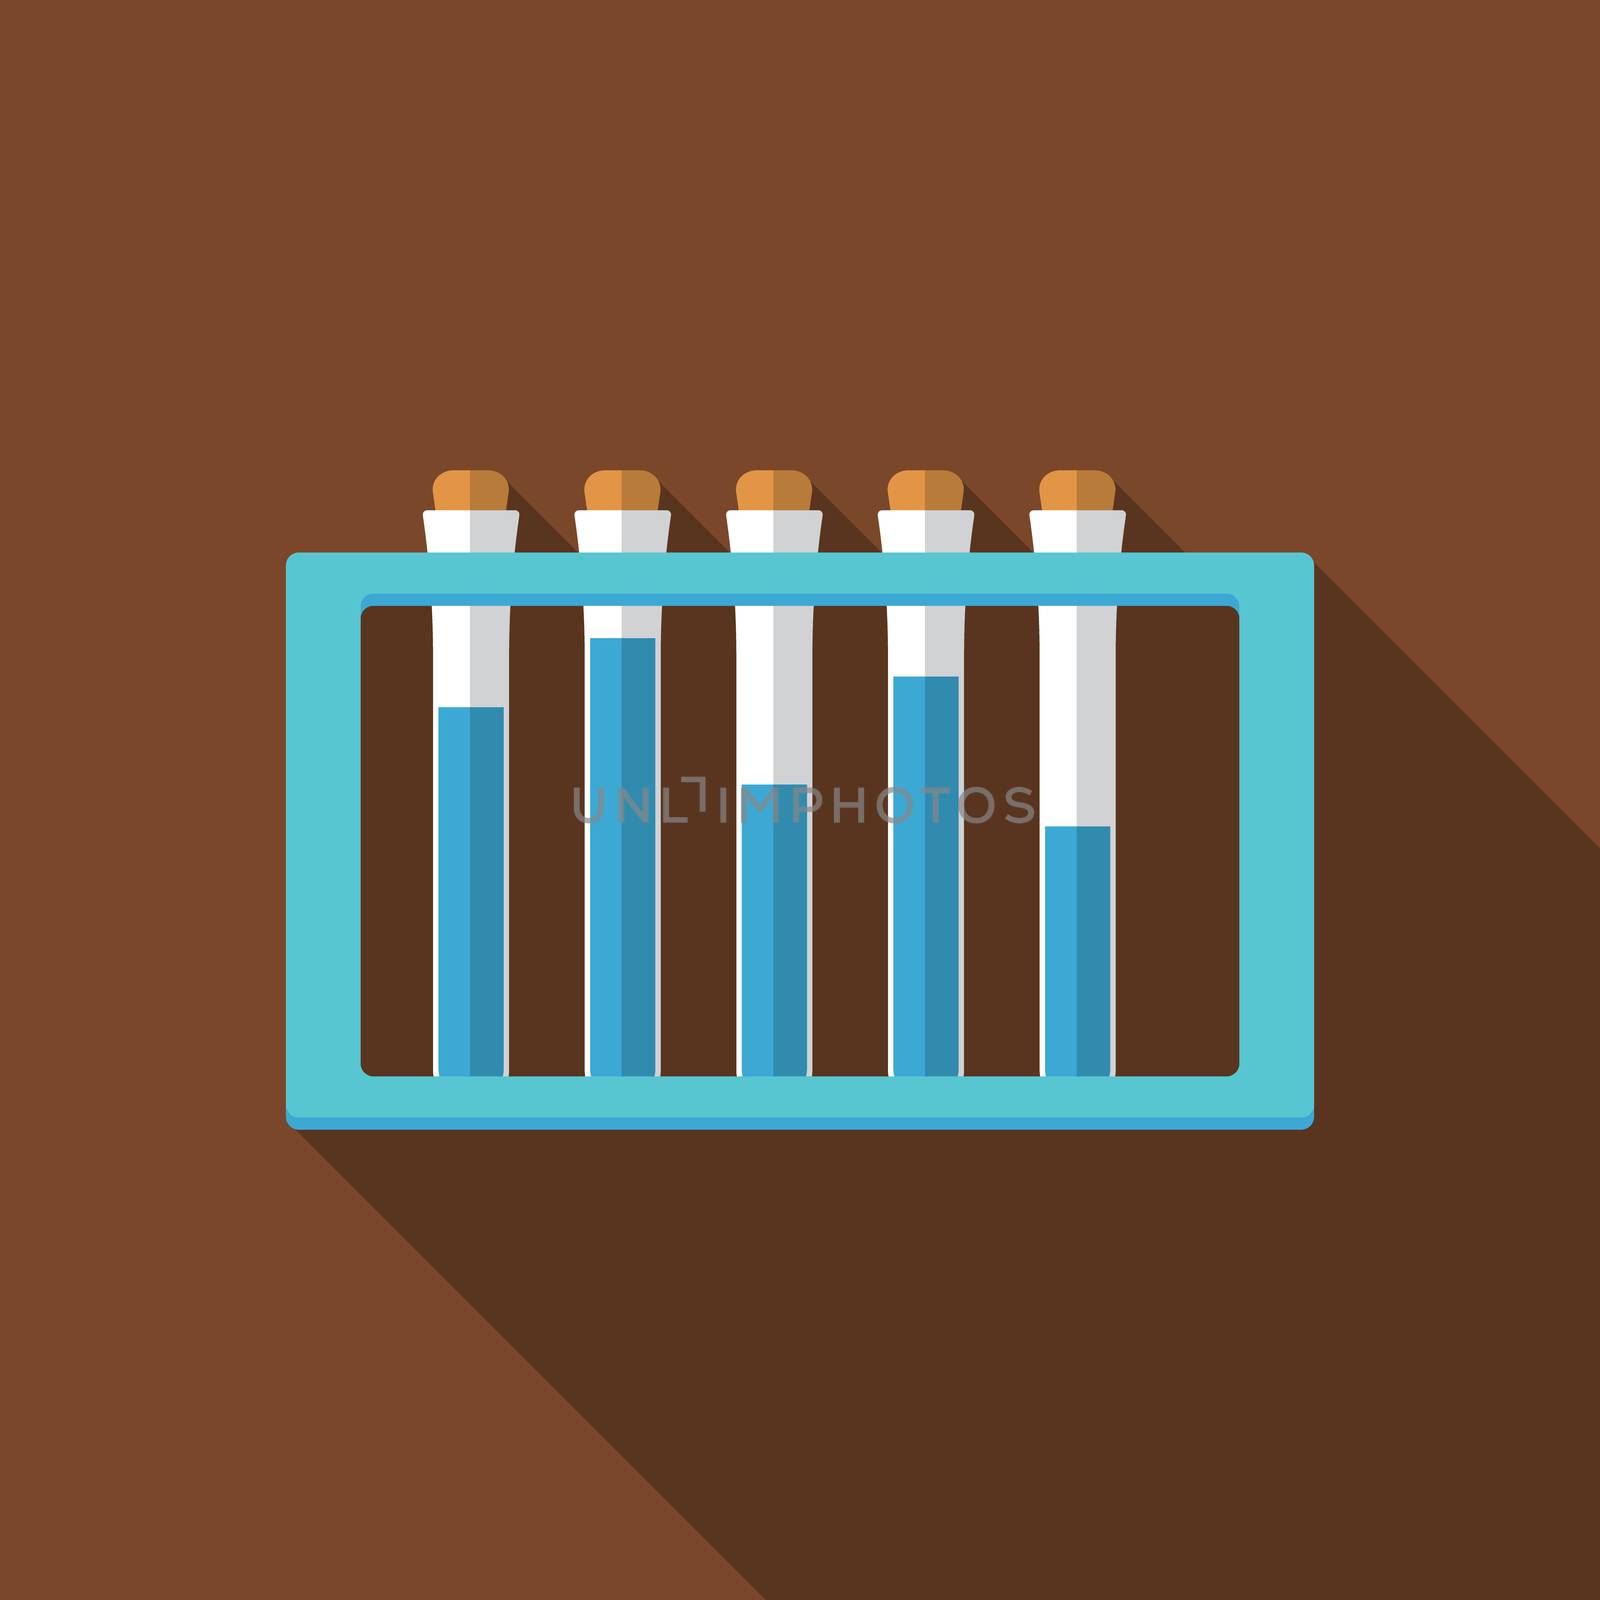 Flat design modern vector illustration of laboratory samples icon with long shadow by Lemon_workshop